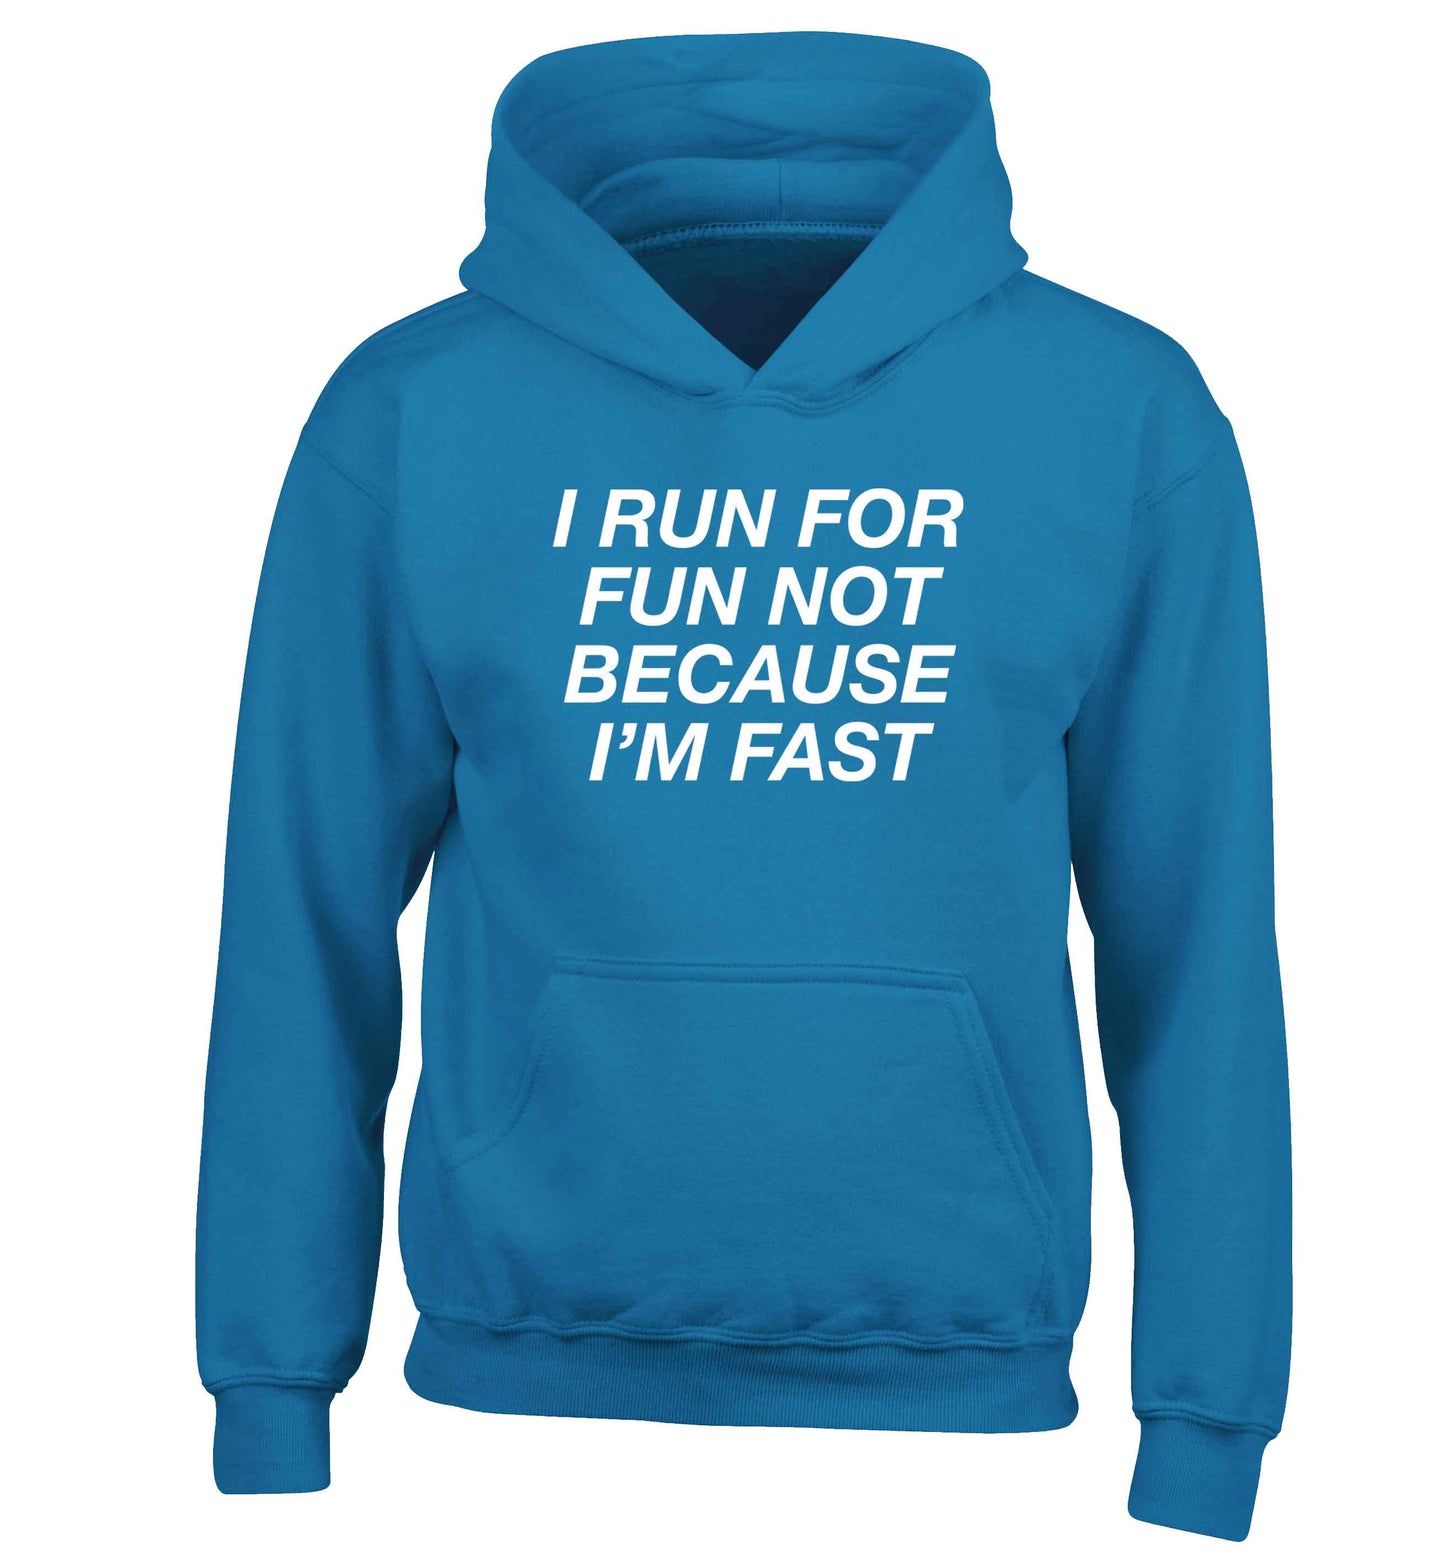 I run for fun not because I'm fast children's blue hoodie 12-13 Years